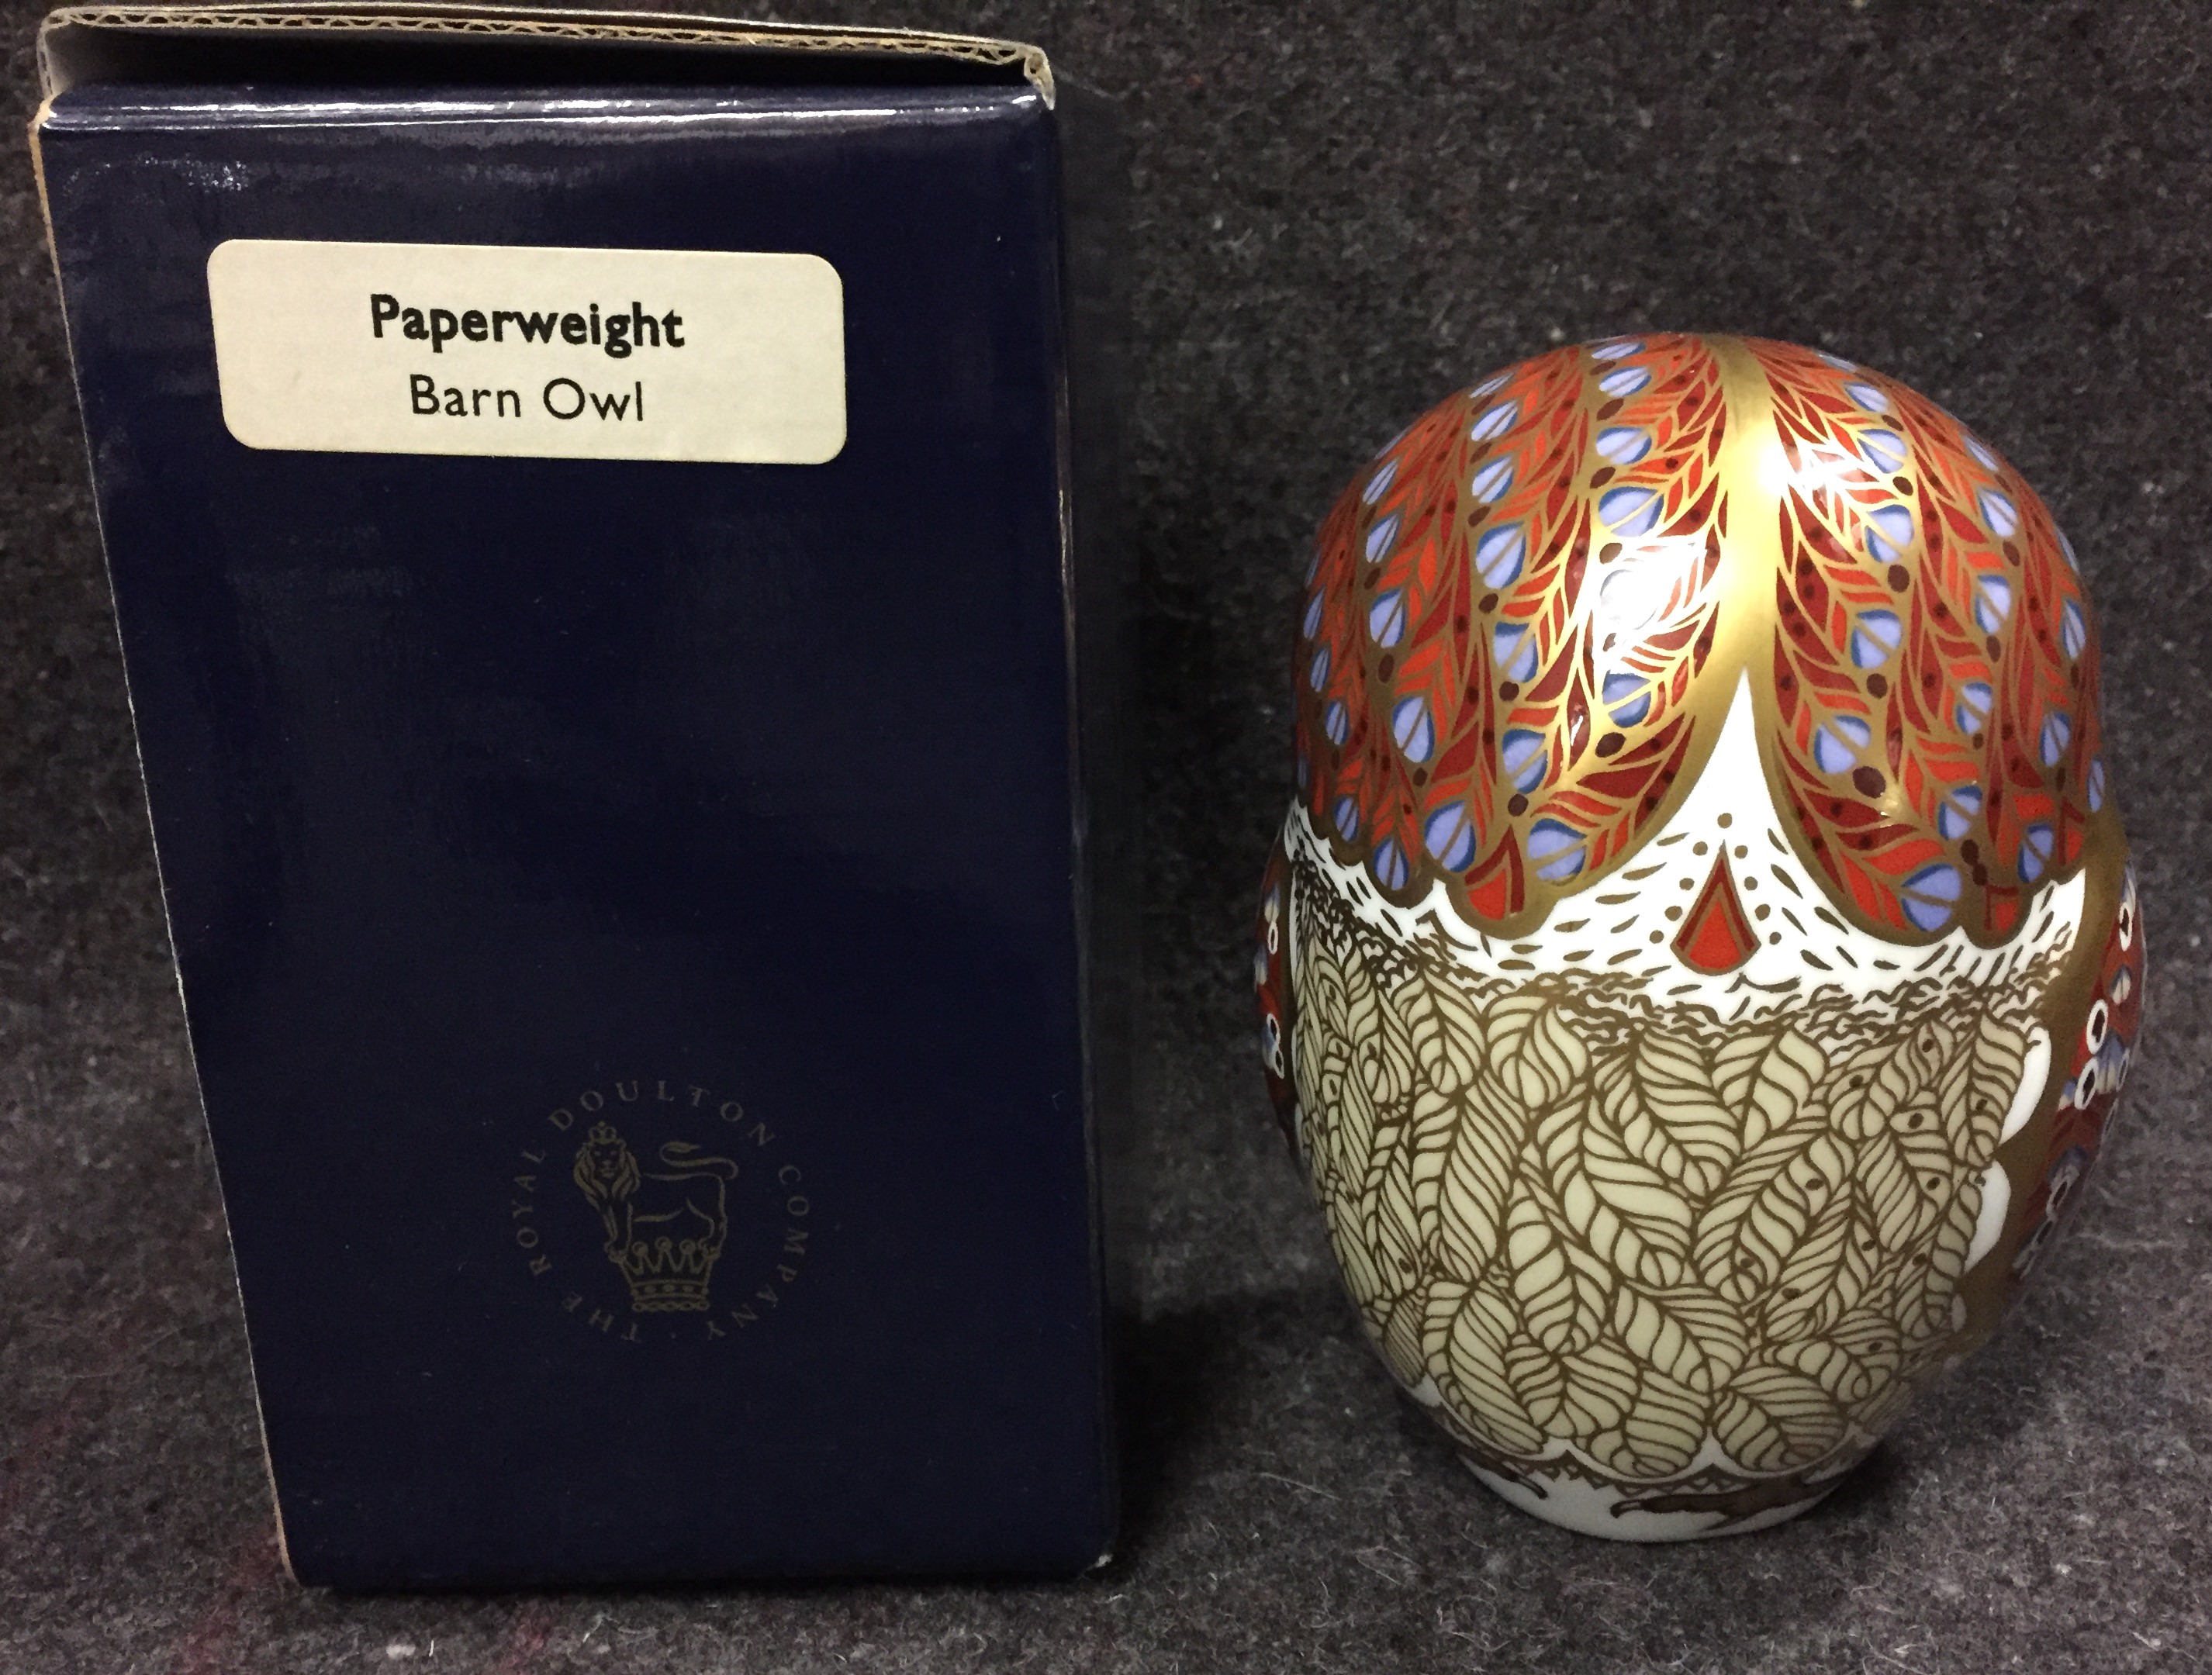 Royal Crown Derby Barn Owl paperweight 11cm high with box (saleroom location Y05 2) - Image 2 of 3